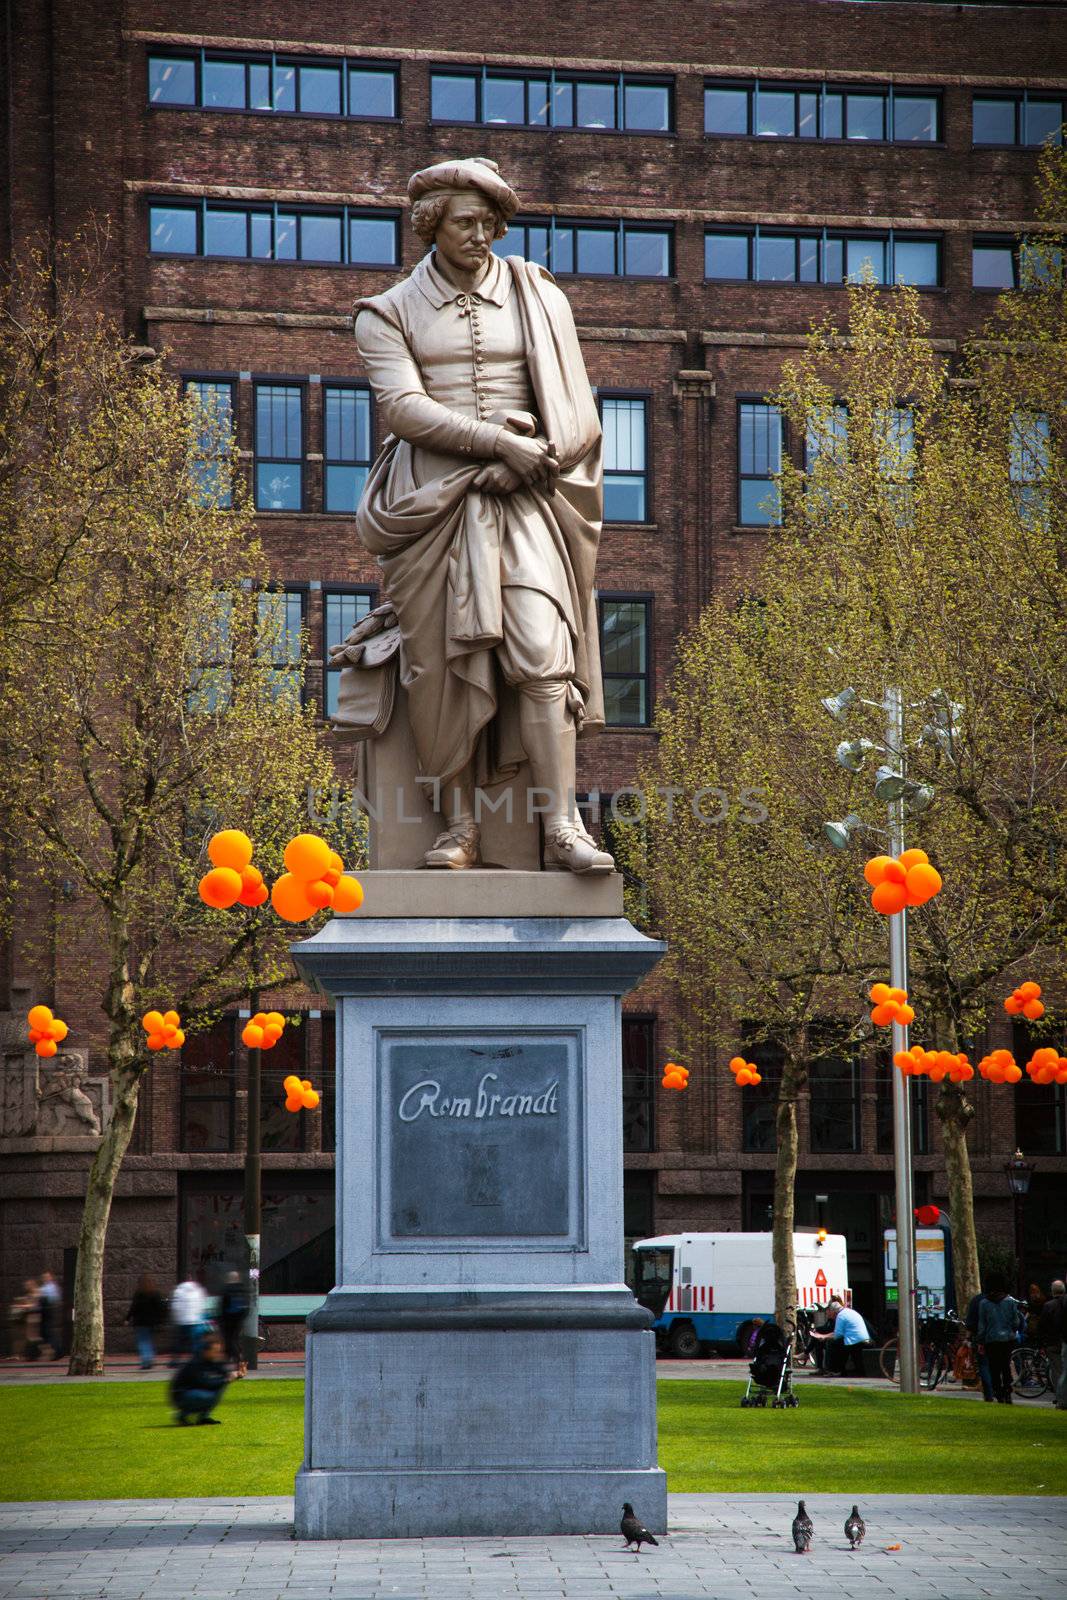 The statue of Rembrandt, Amsterdam, Holland, Netherlands